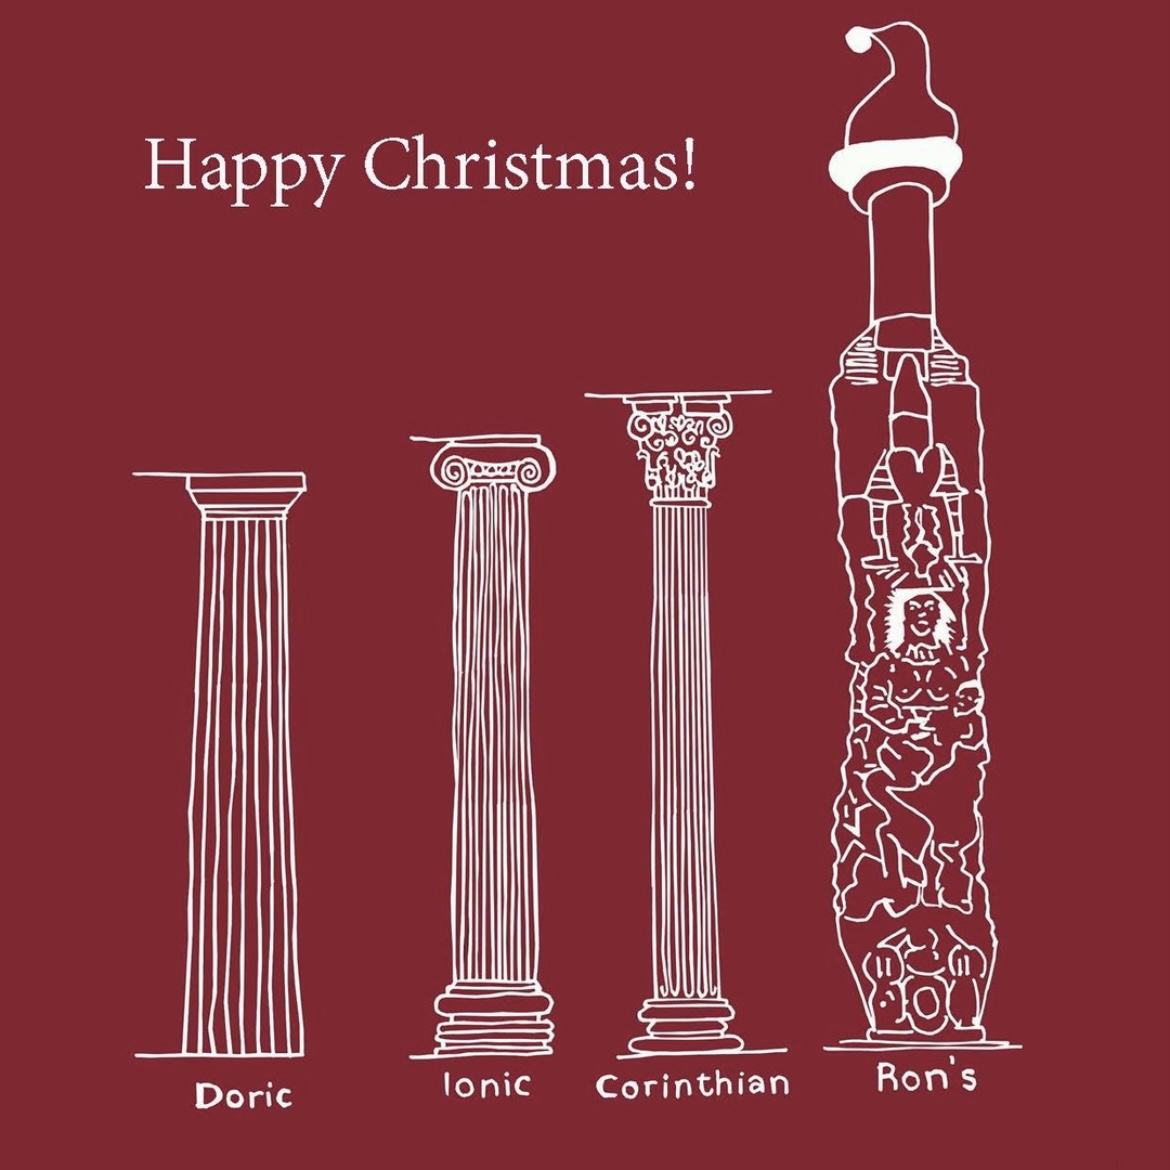 Happy Christmas from the team at Ron’s Place! This lovely Christmas Card art showing one of Ron’s lost columns was made by our resident heritage and architectural consultant Bernadette ! Happy Holidays 😁❄️🎄